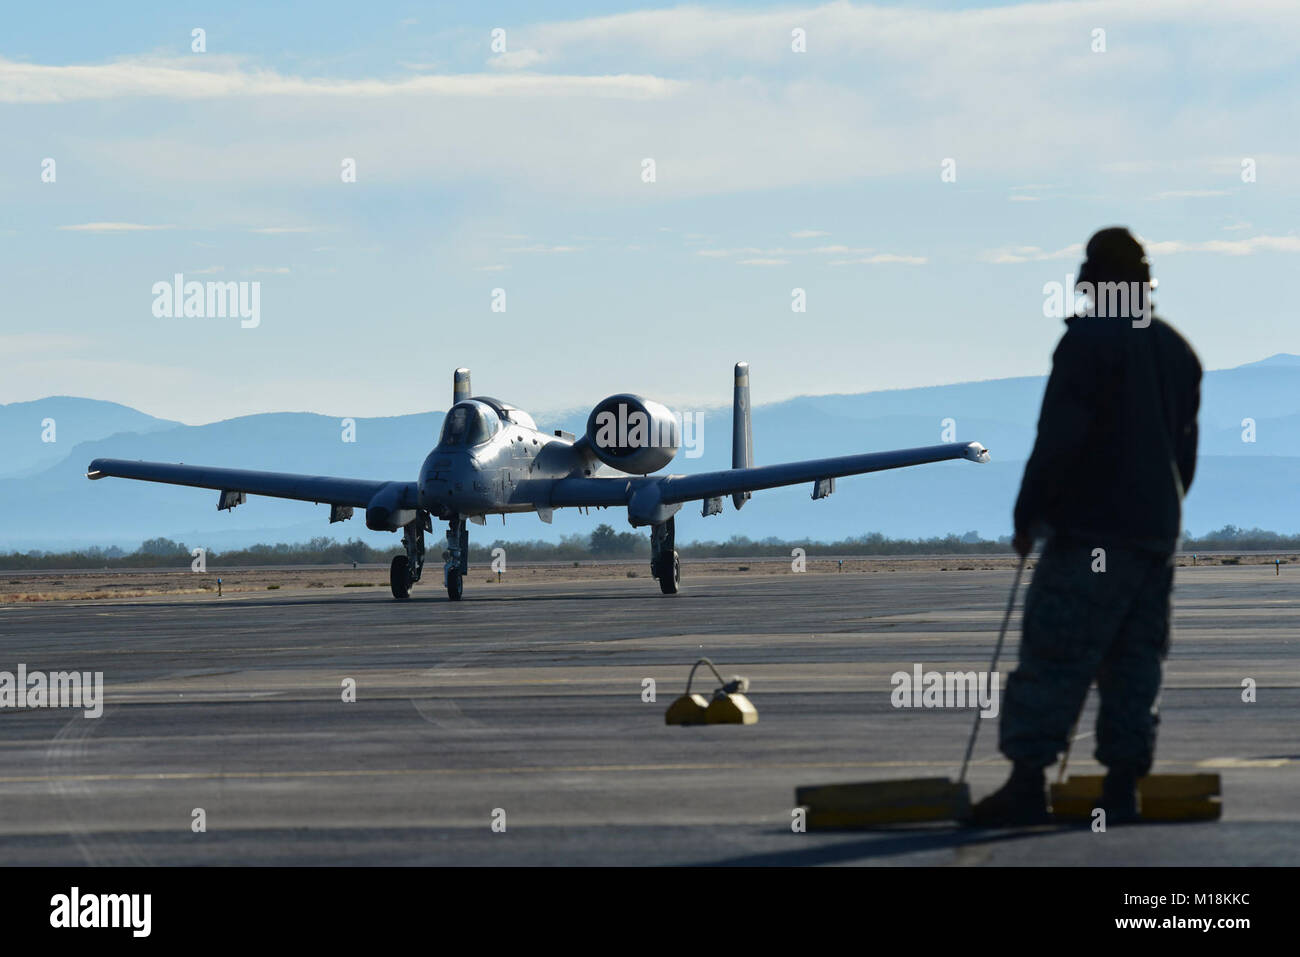 U.S. Air Force Staff Sgt. Andre Gonzales, A-10C Thunderbolt II Demonstration Team avionics systems craftsman, watches as an A-10 taxis during an off-station training flight at Gila Bend Auxiliary Airfield, Ariz., Dec. 18, 2017. As part of the requirements for certification as a demo team, the team must complete three off-station training flights. (U.S. Air Force Stock Photo